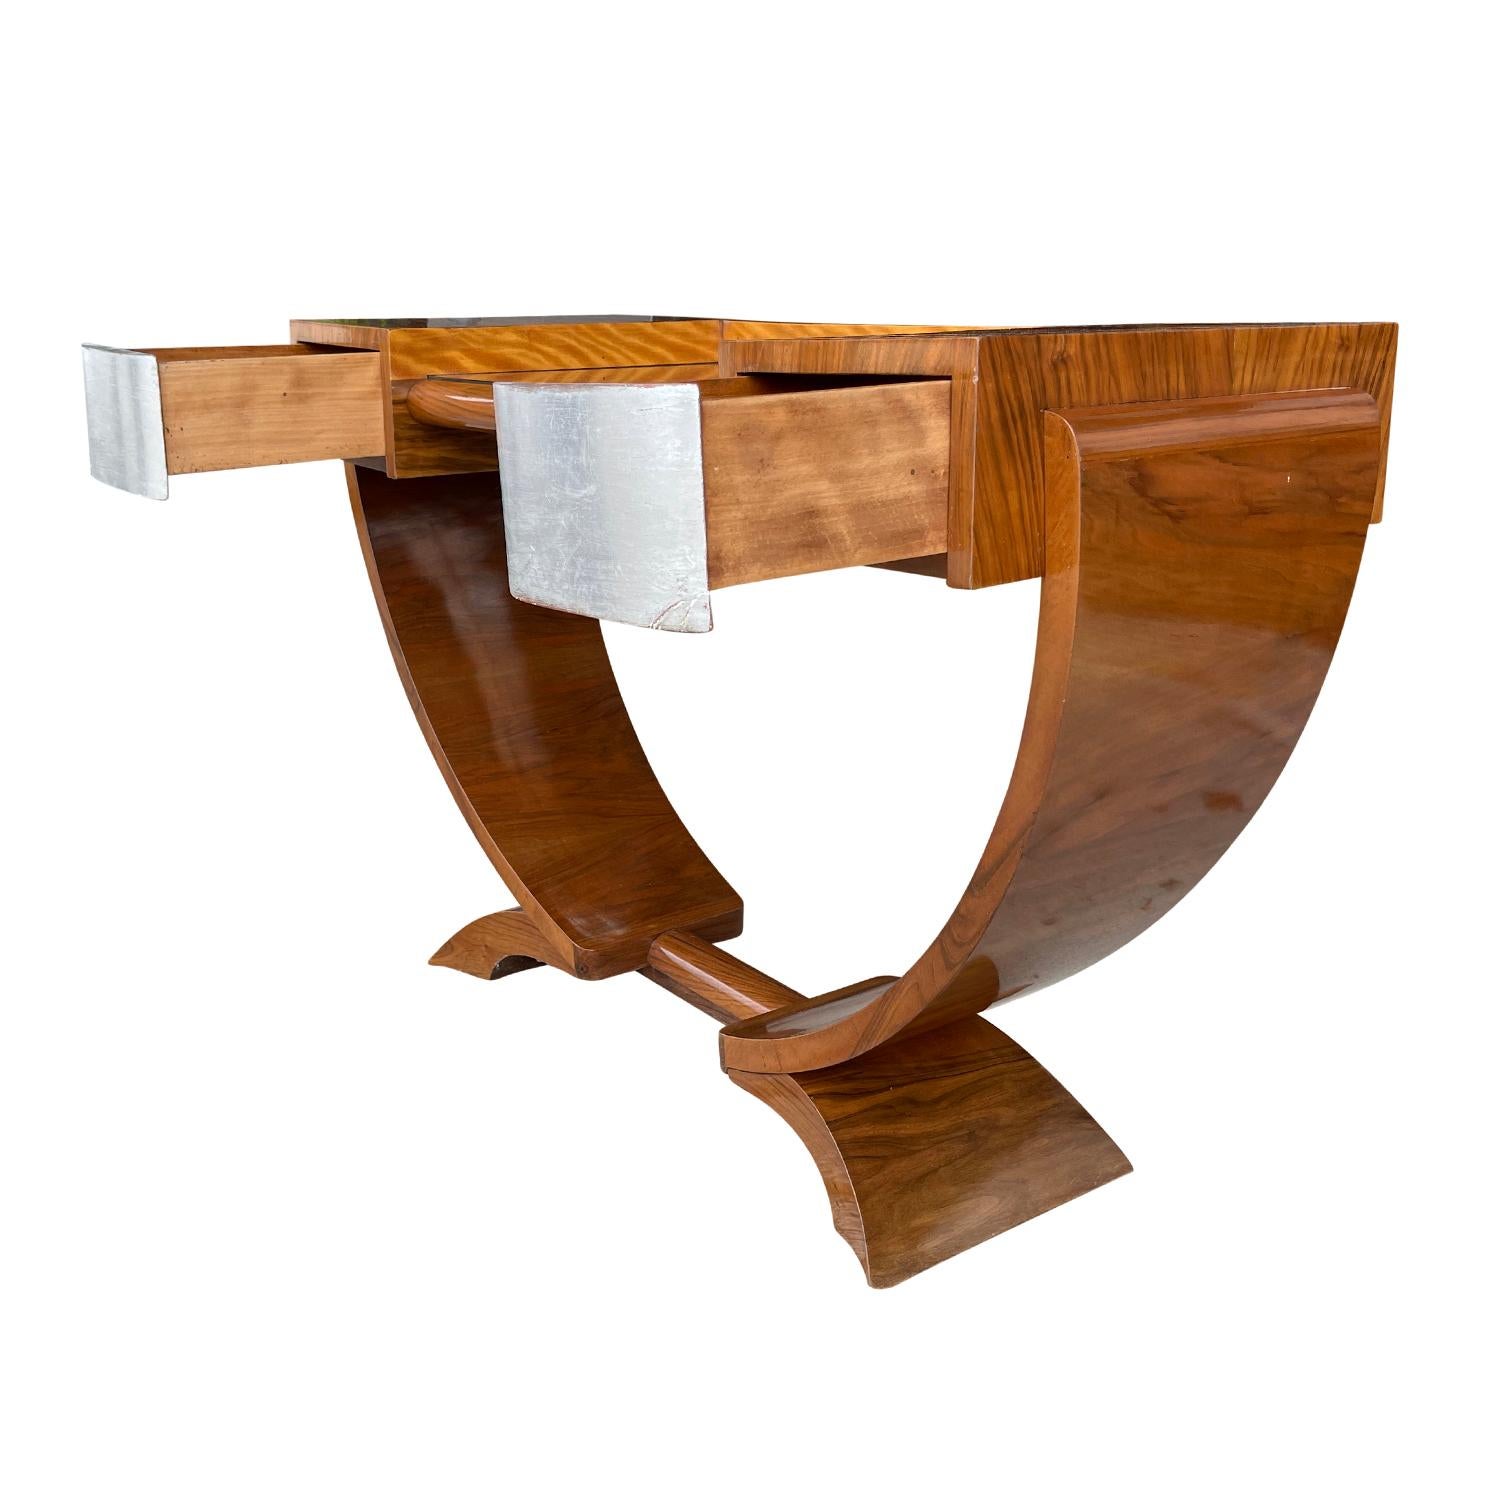 20th Century French Art Deco Walnut Coiffeuse Vanity by Émile-Jacques Ruhlmann For Sale 1